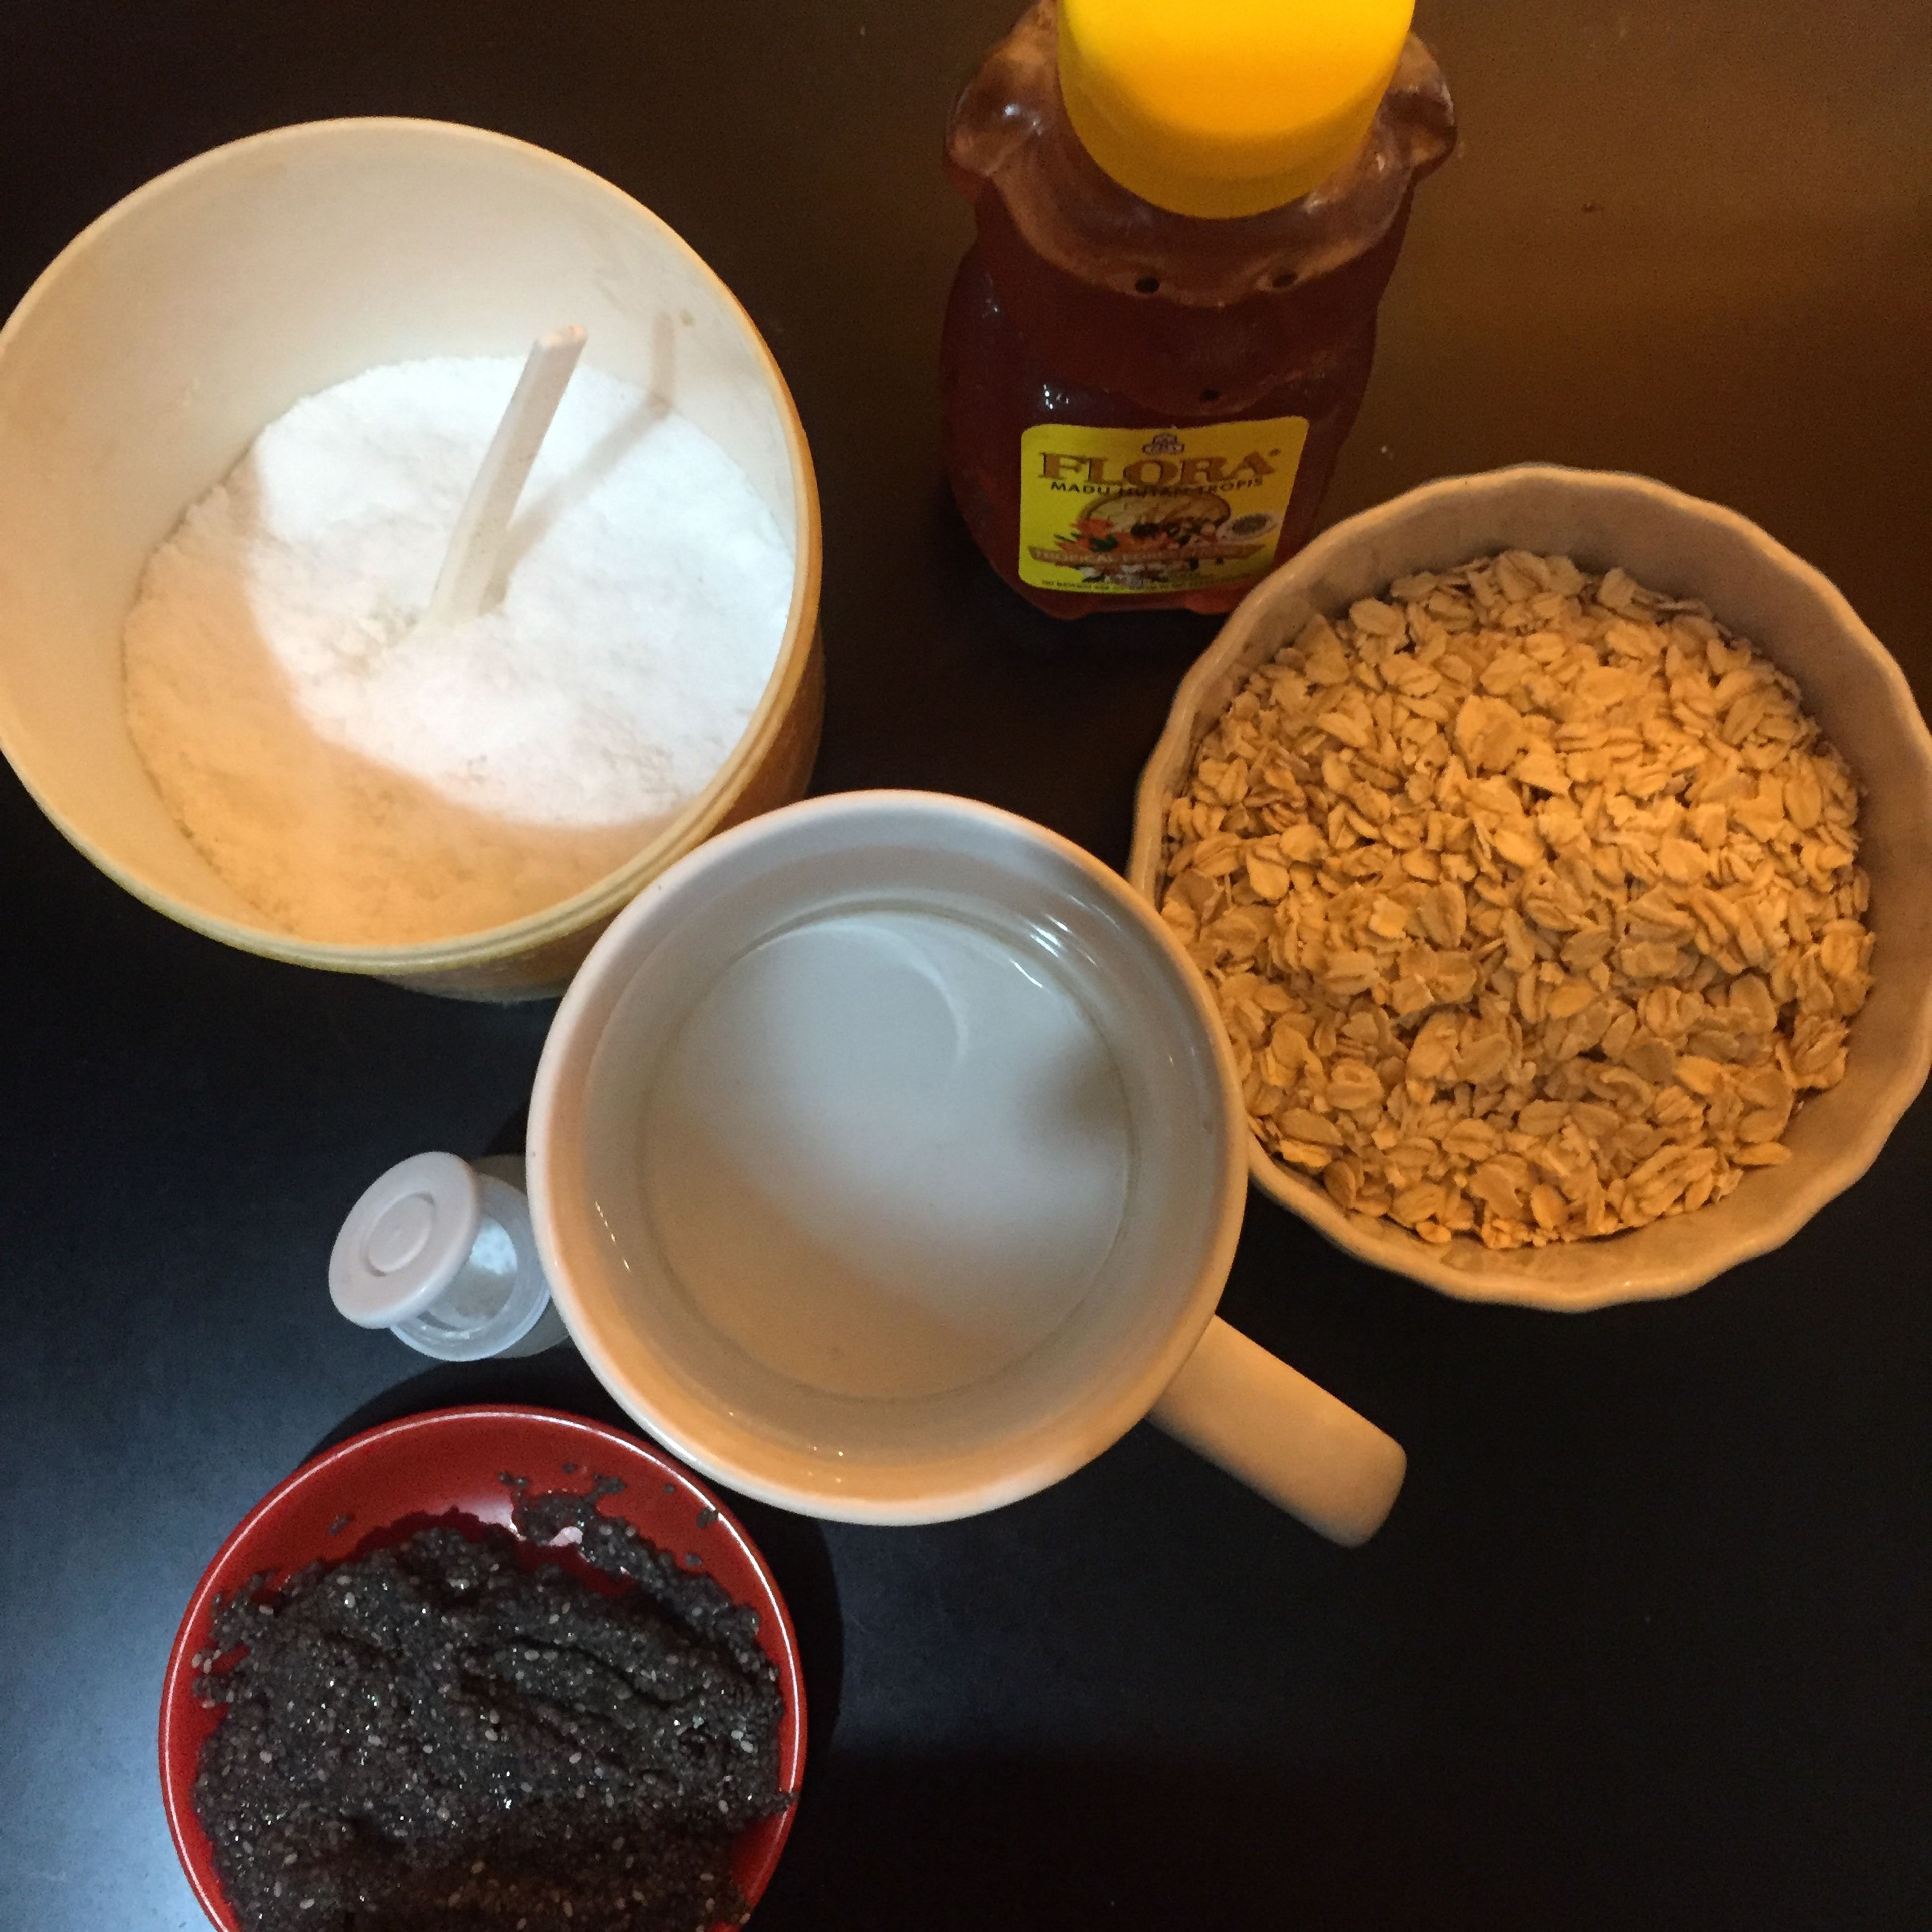 This ingredients homemade chia seeds oatmilk